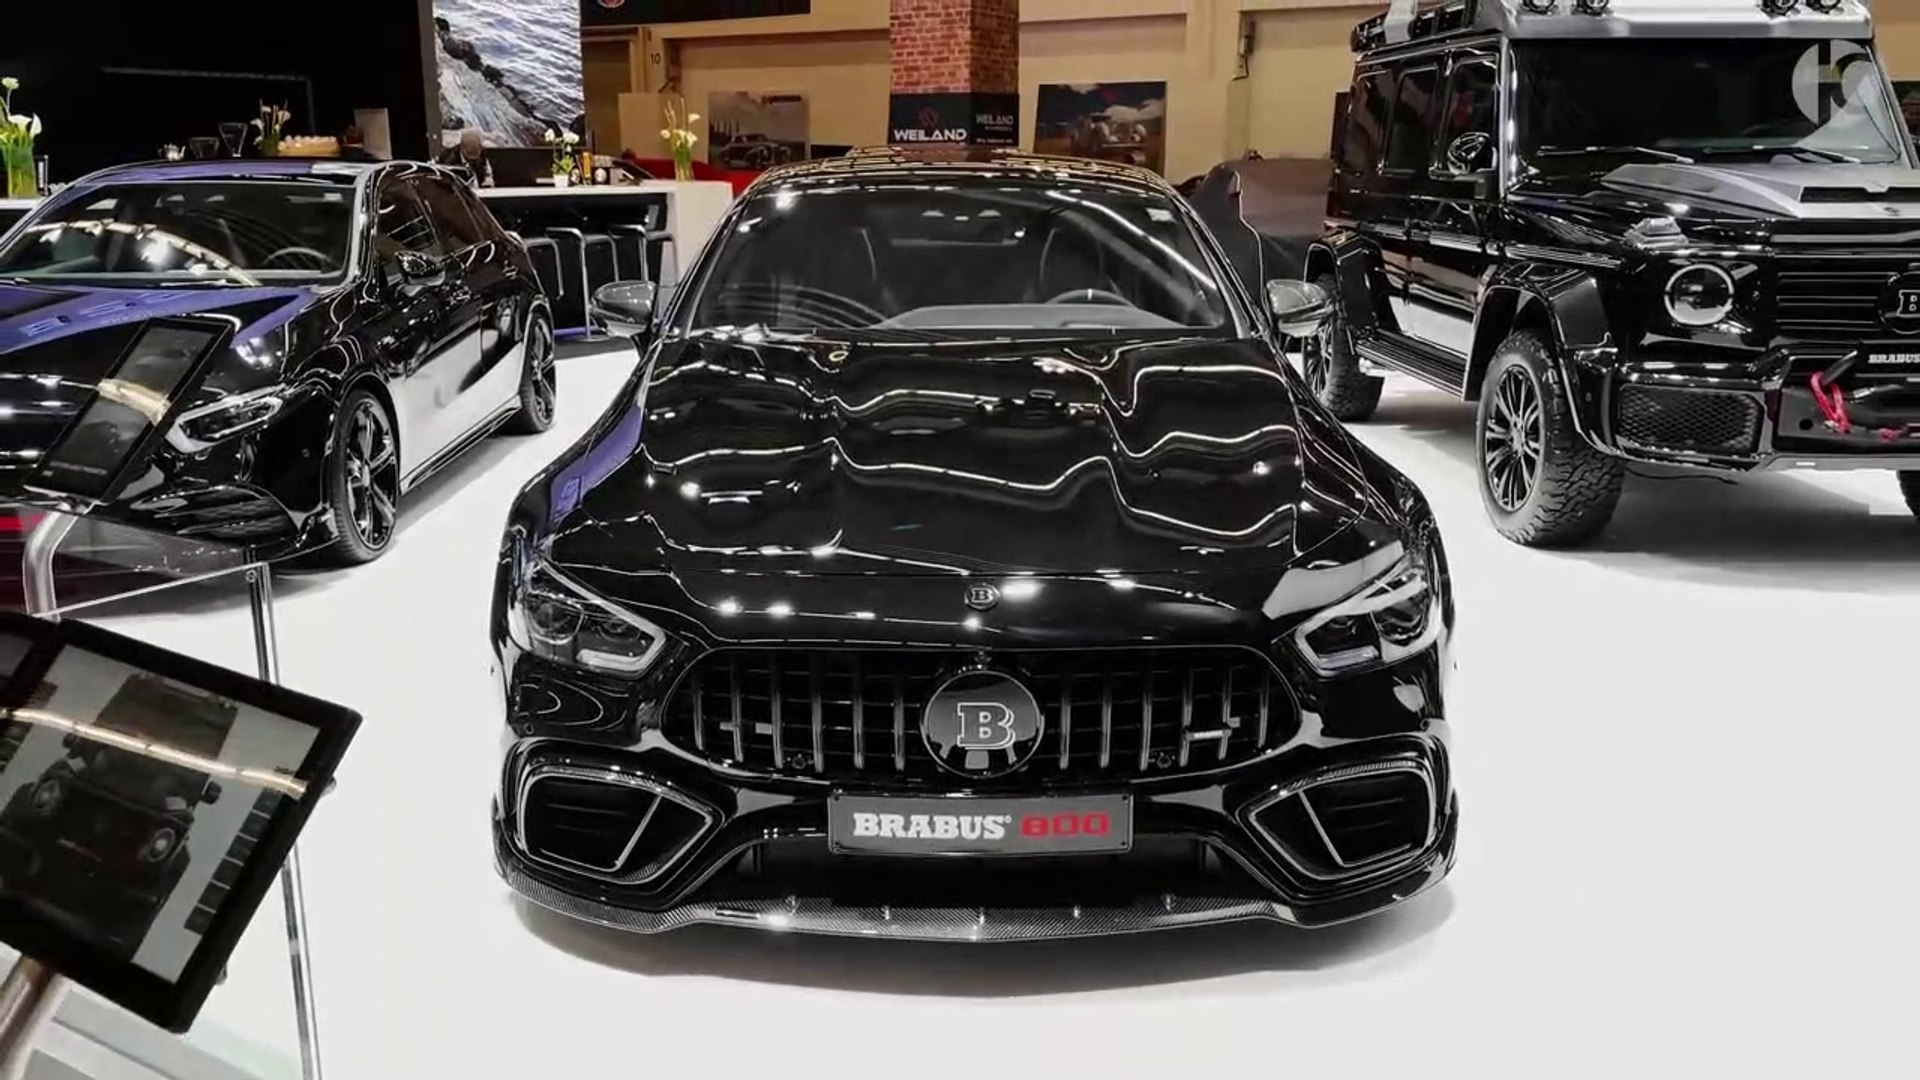 2020 Brabus 800 Mercedes Amg Gt 63 S Interior And Exterior Details